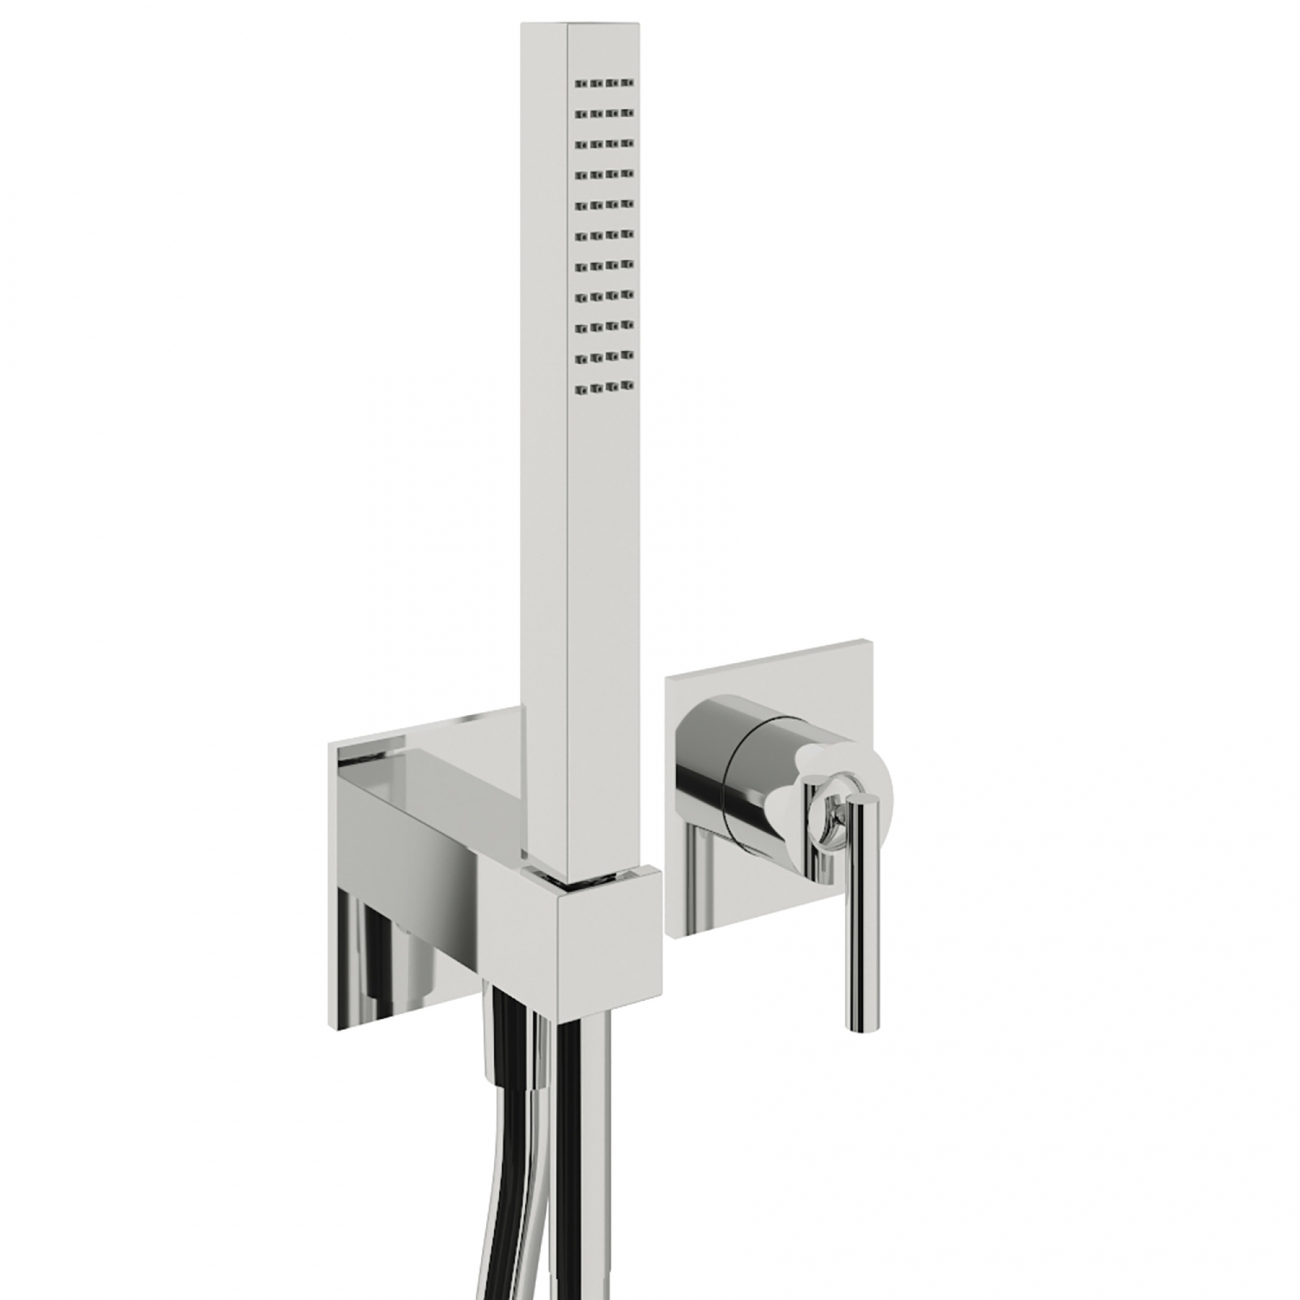 Treemme Arché wall-mounted bathtub shower mixer